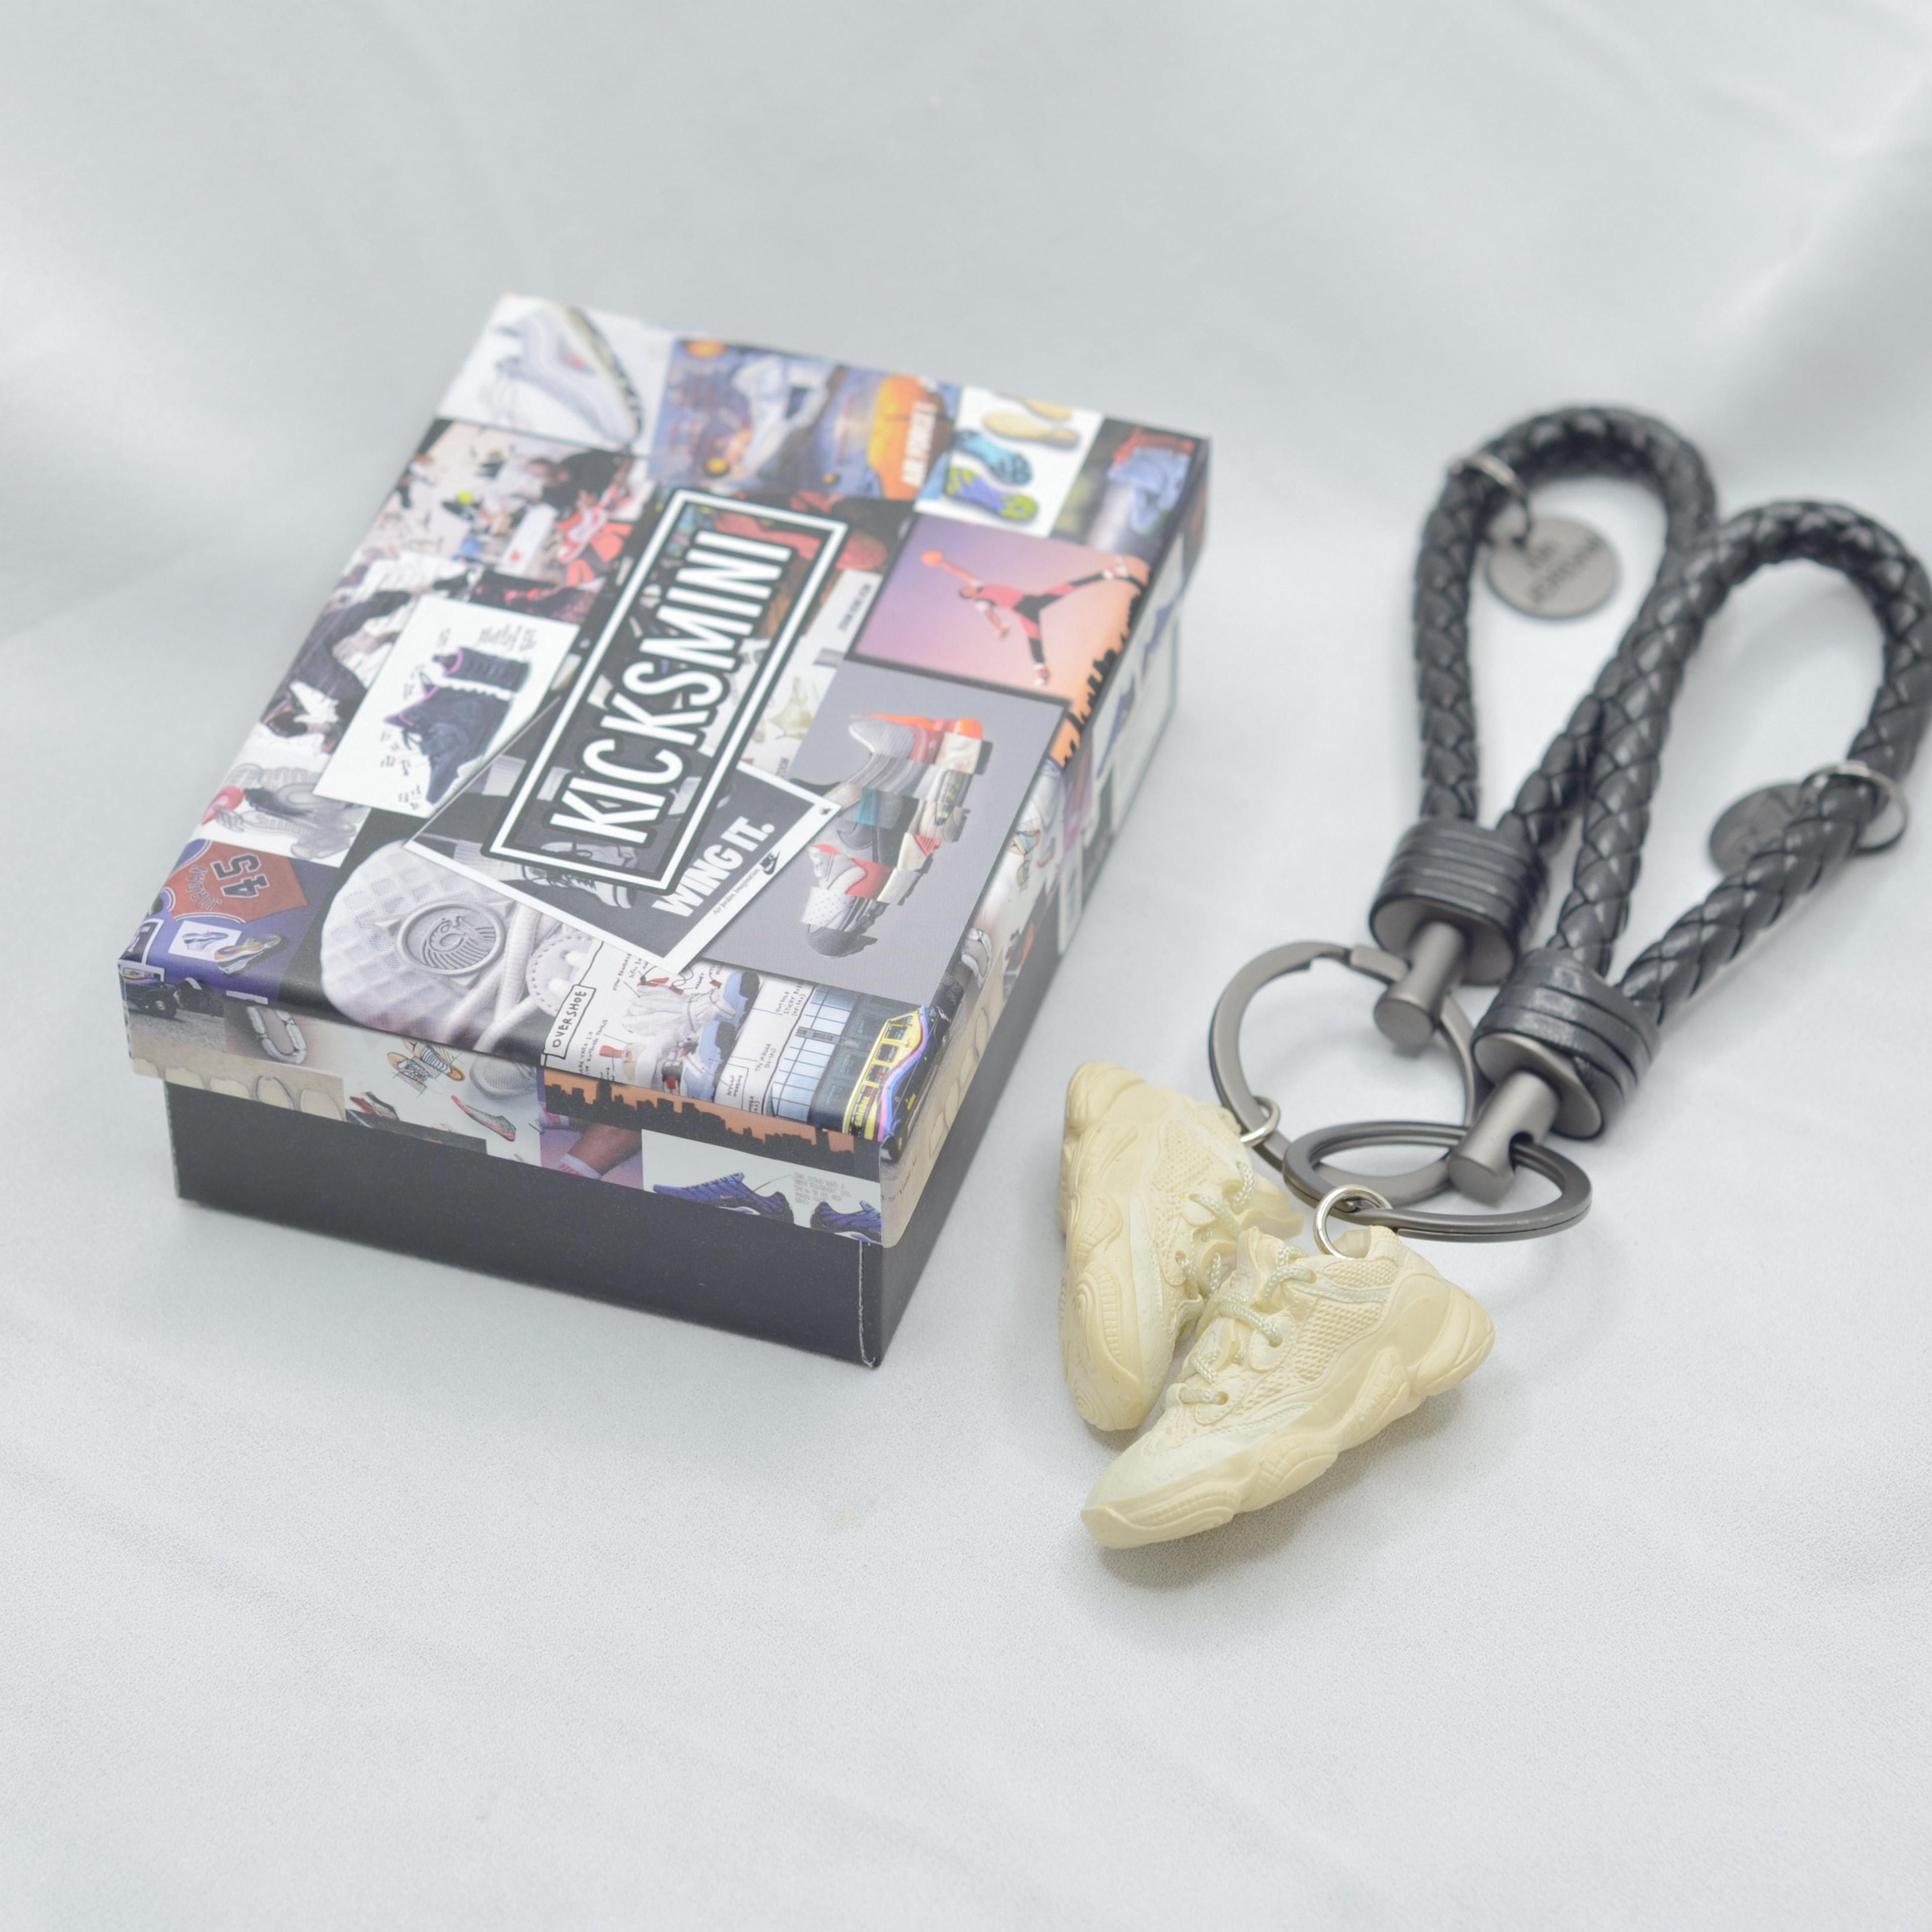 Alternate View 6 of Yeezy/NMD Collaboration 3D Mini Sneakers Keychain with BV Rope/B